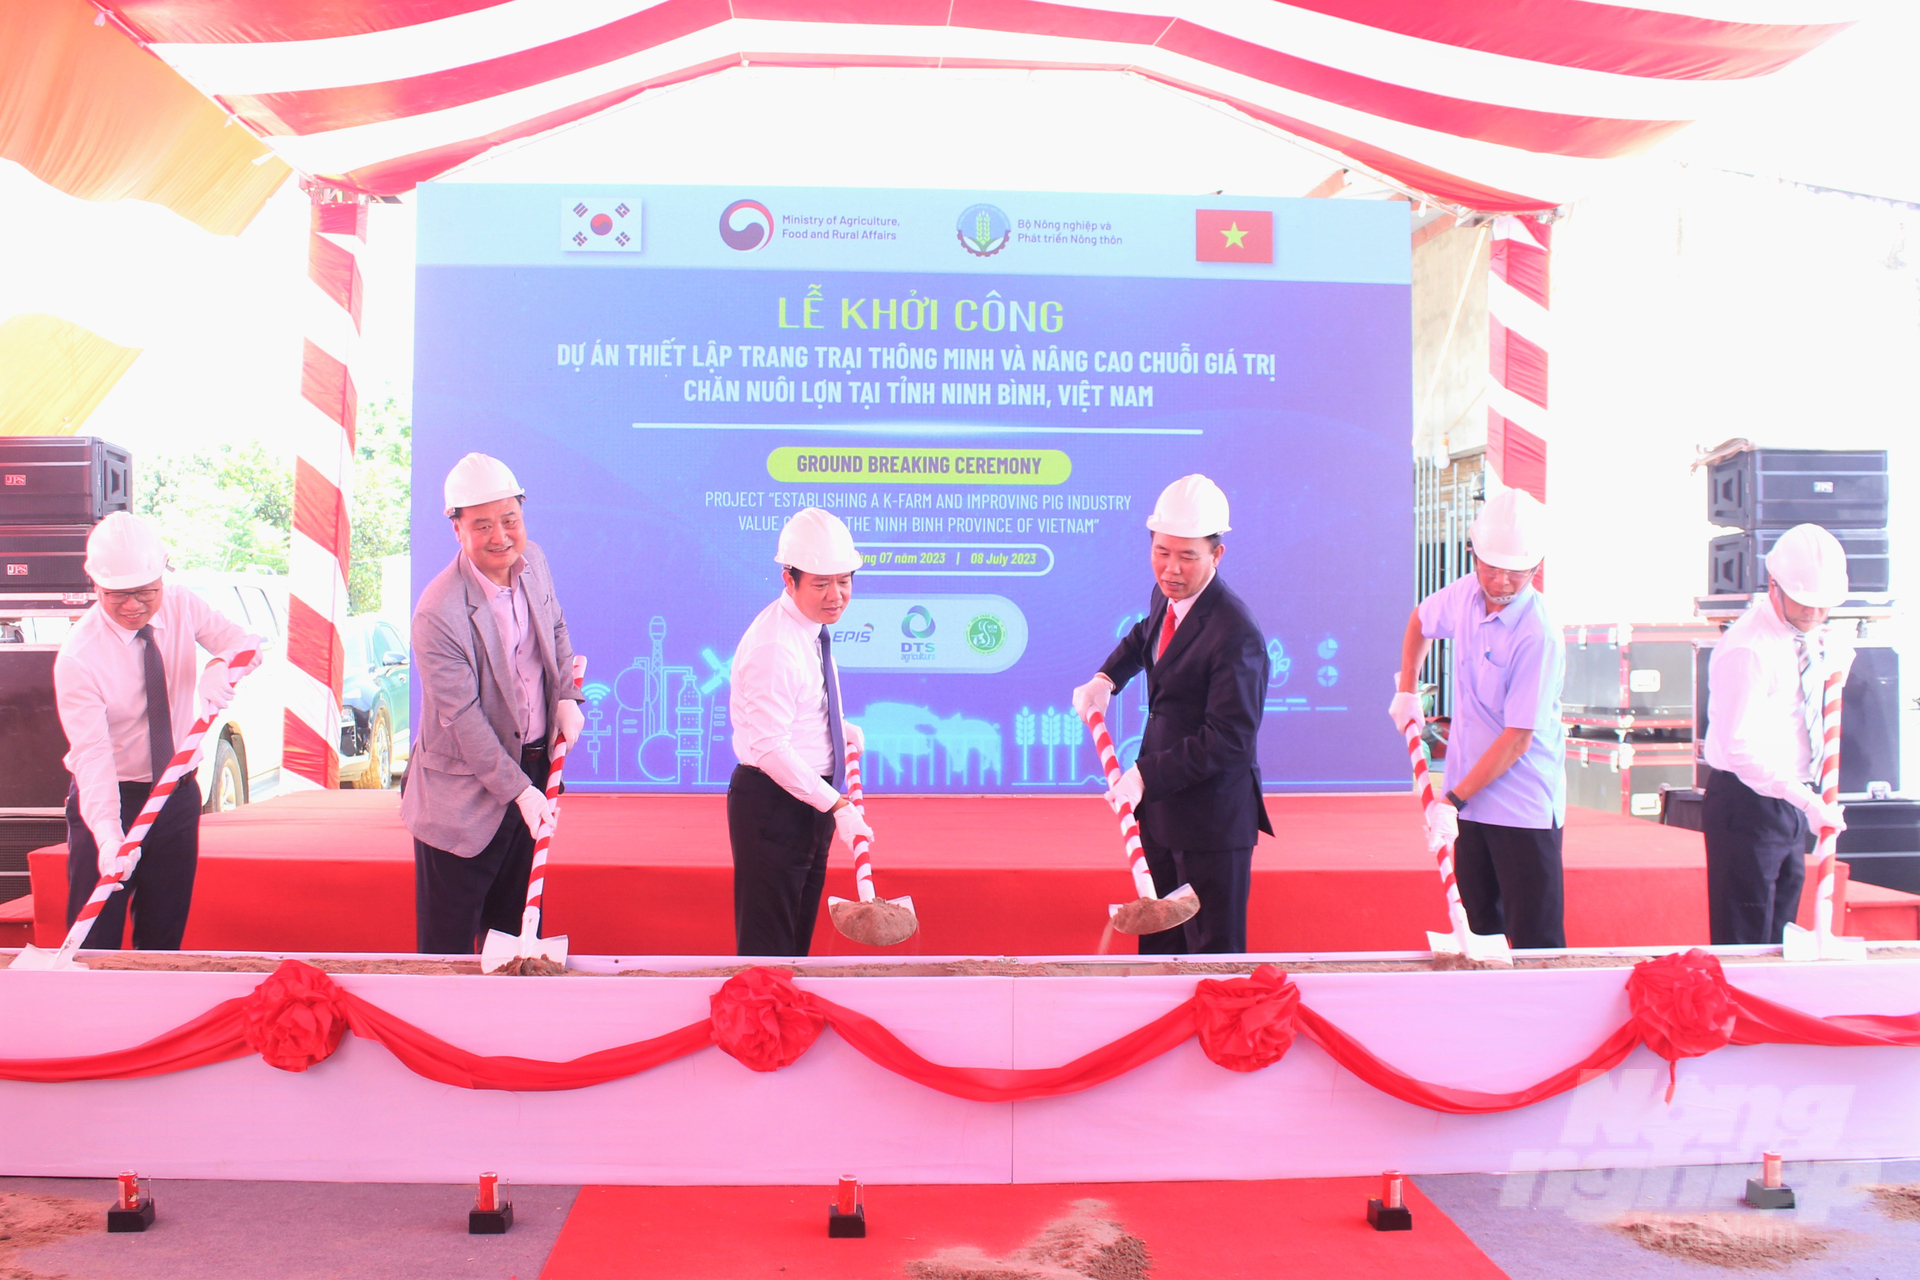 Delegates broke ground on Project on Establishing a Smart Farm and Strengthening the Pig Farming Value Chain in Ninh Binh. Photo: Trung Quan.